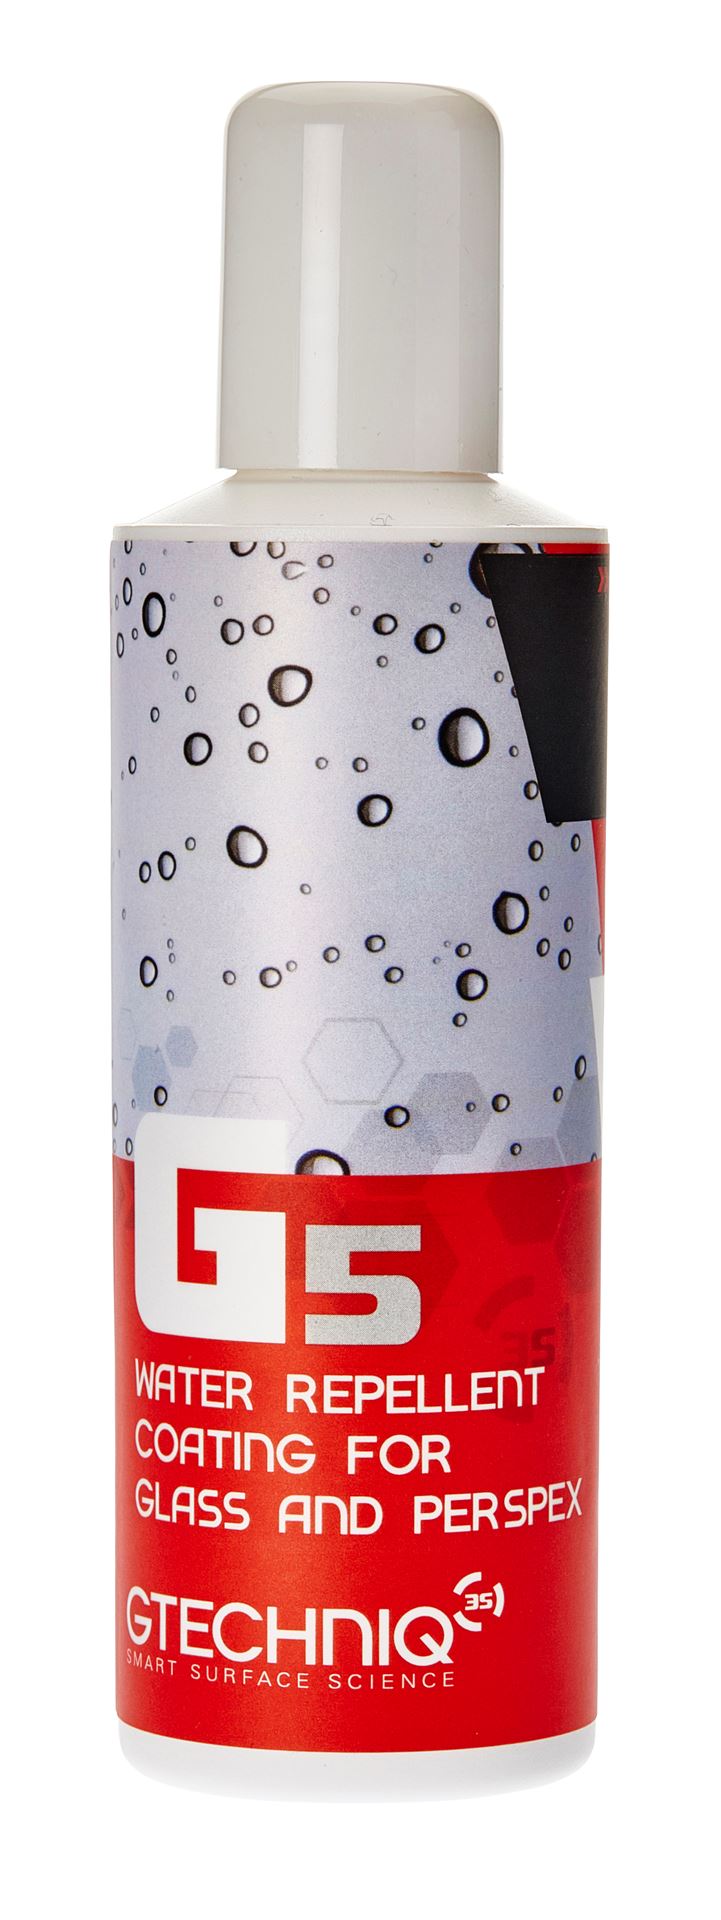 G5 Water Repellent Coating For Glass And Perspex G5 100ml Professional Detailing Products Because Your Car Is A Reflection Of You